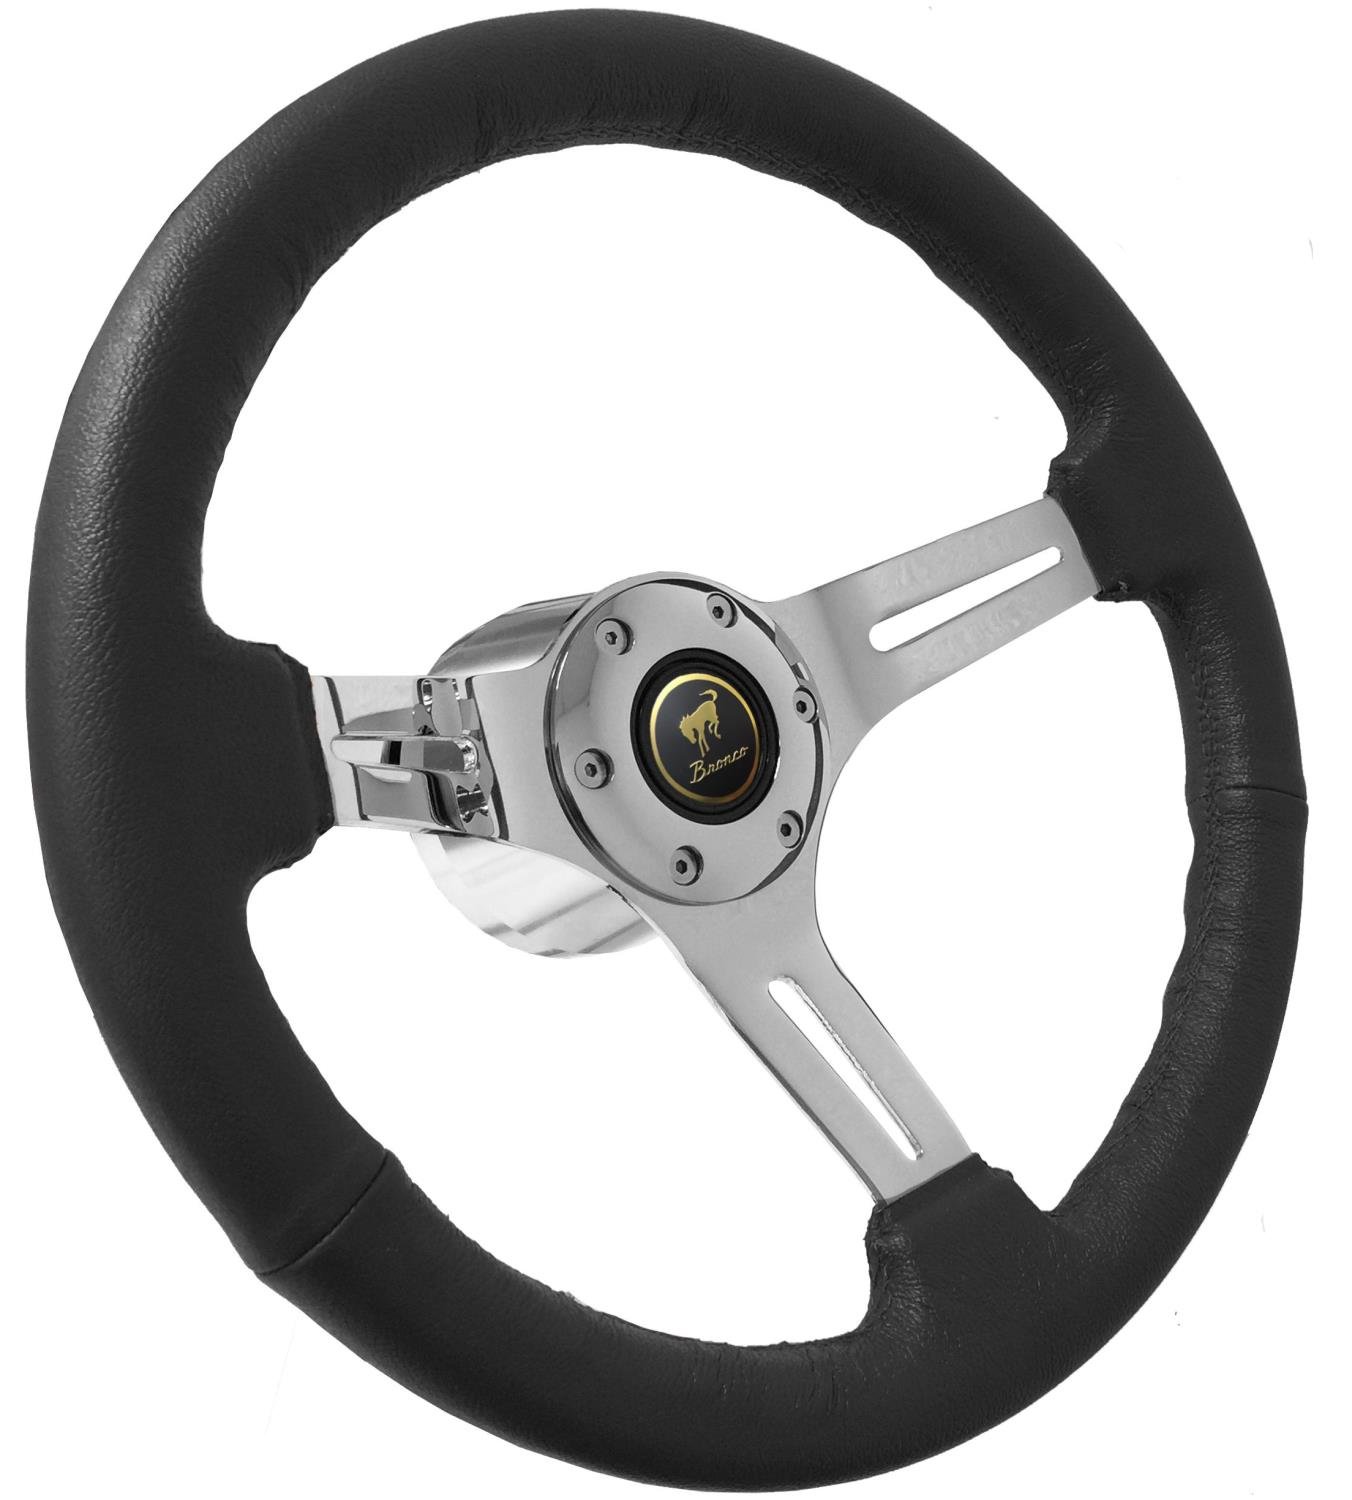 S6 Sport Steering Wheel Kit for 1968-1991 Ford/Mercury, 14 in. Diameter, Black Leather Grip, with 6-Bolt Adapter and Horn Button